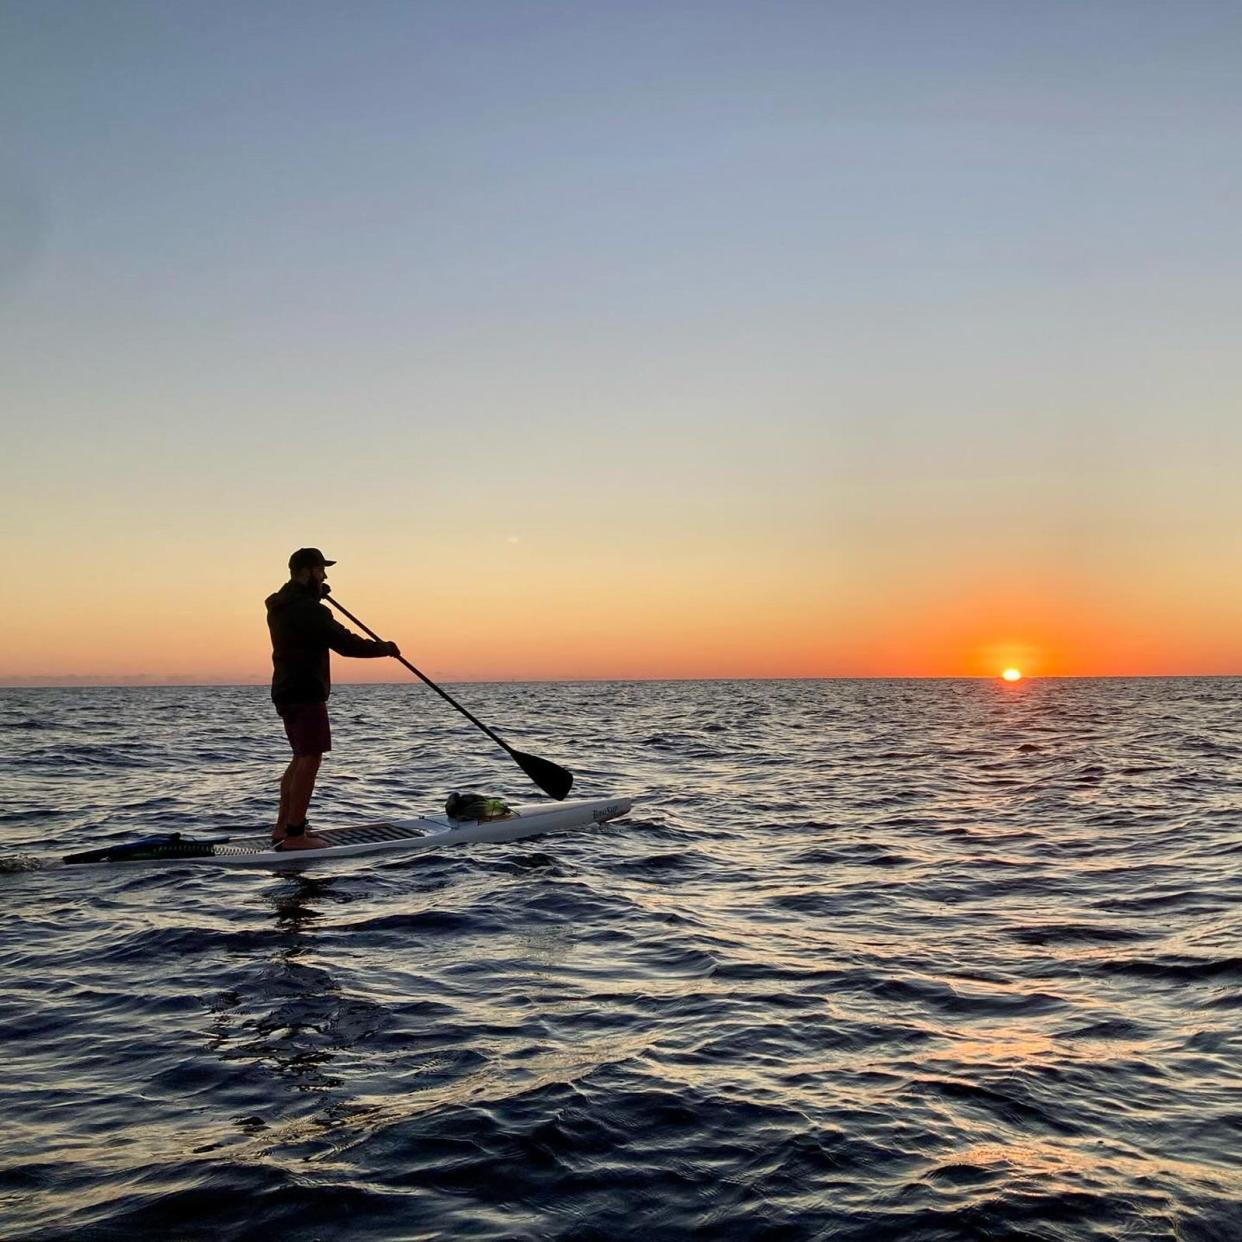 Jordon Wolfram of Lakeland paddles on Lake Okeechobee at sunrise on Dec. 31. He and a friend, Mason Gravley, believe they are the first to paddle the length of Florida's largest lake.